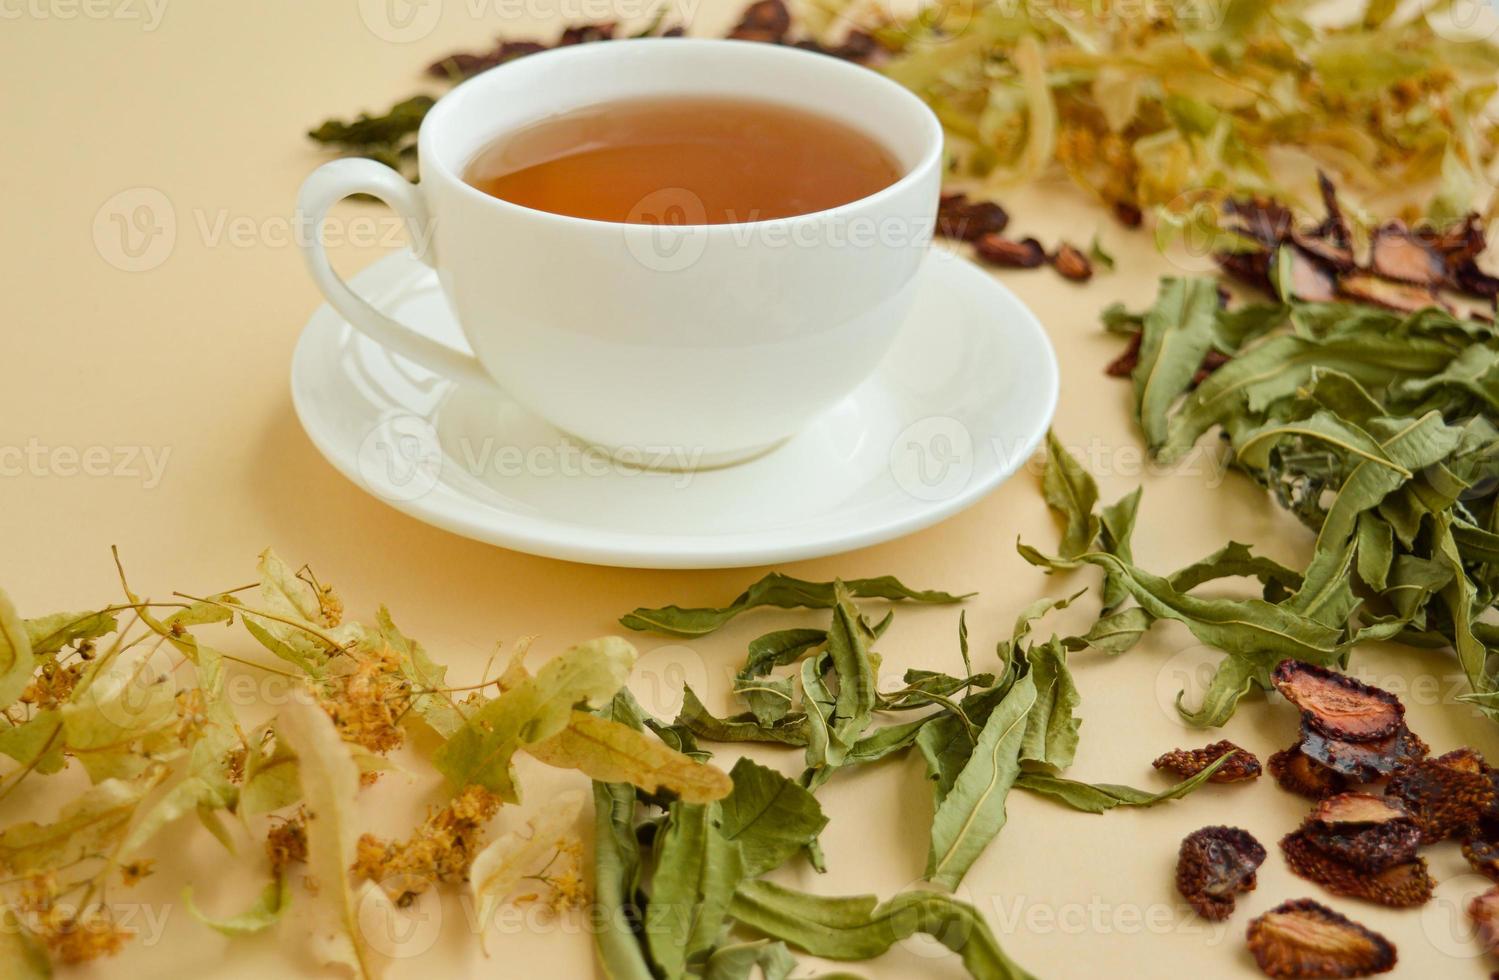 herbal tea in a white cup for beauty and health, dried herbs, linden flowers and strawberries lie around. photo